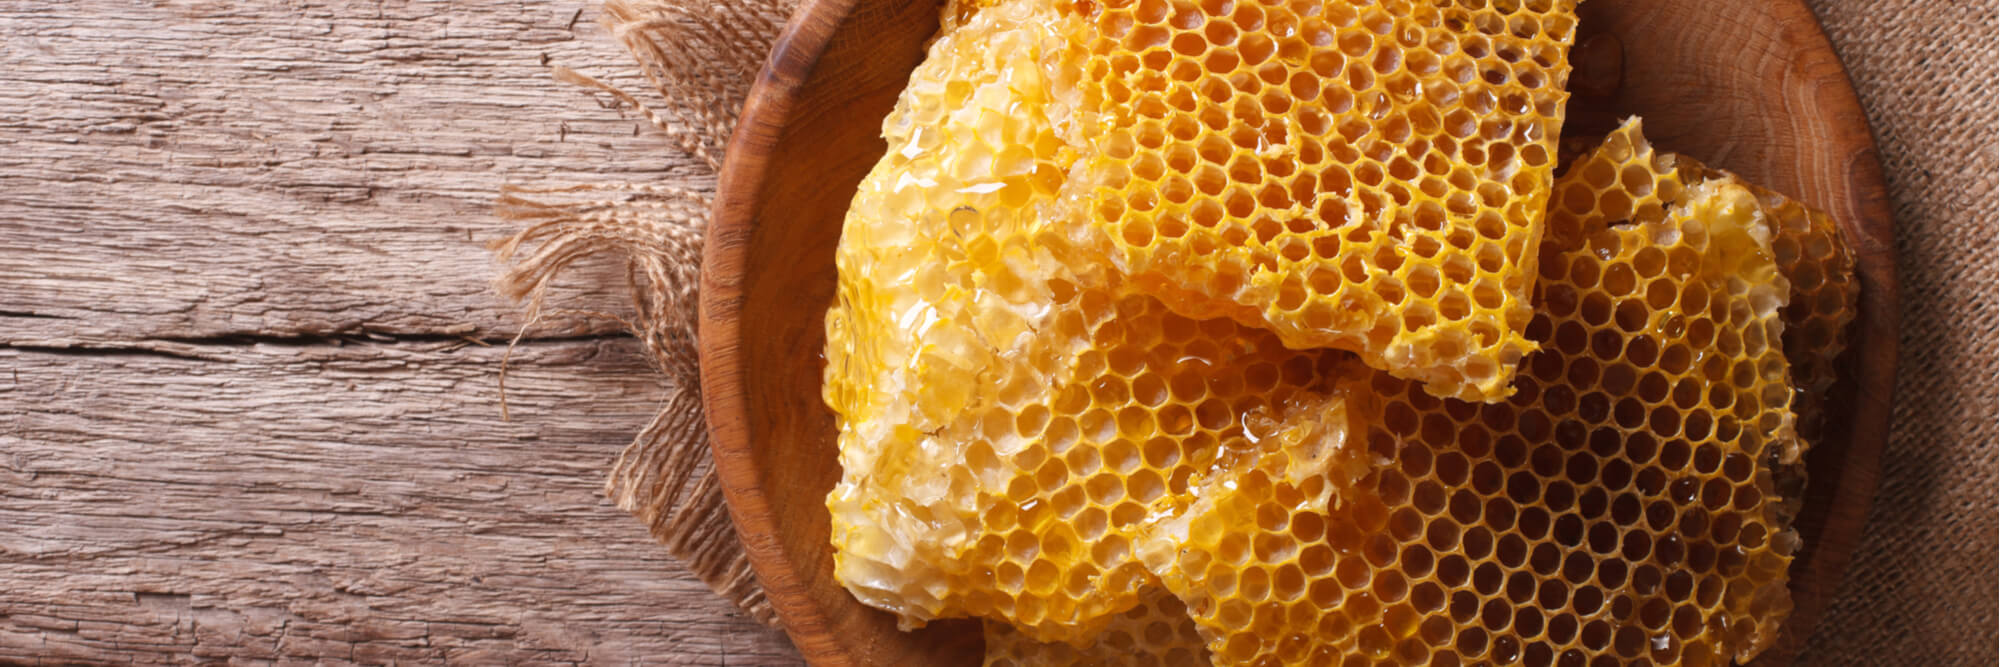 Beeswax and Honey: Natural Crafting Supplies from Your Hive